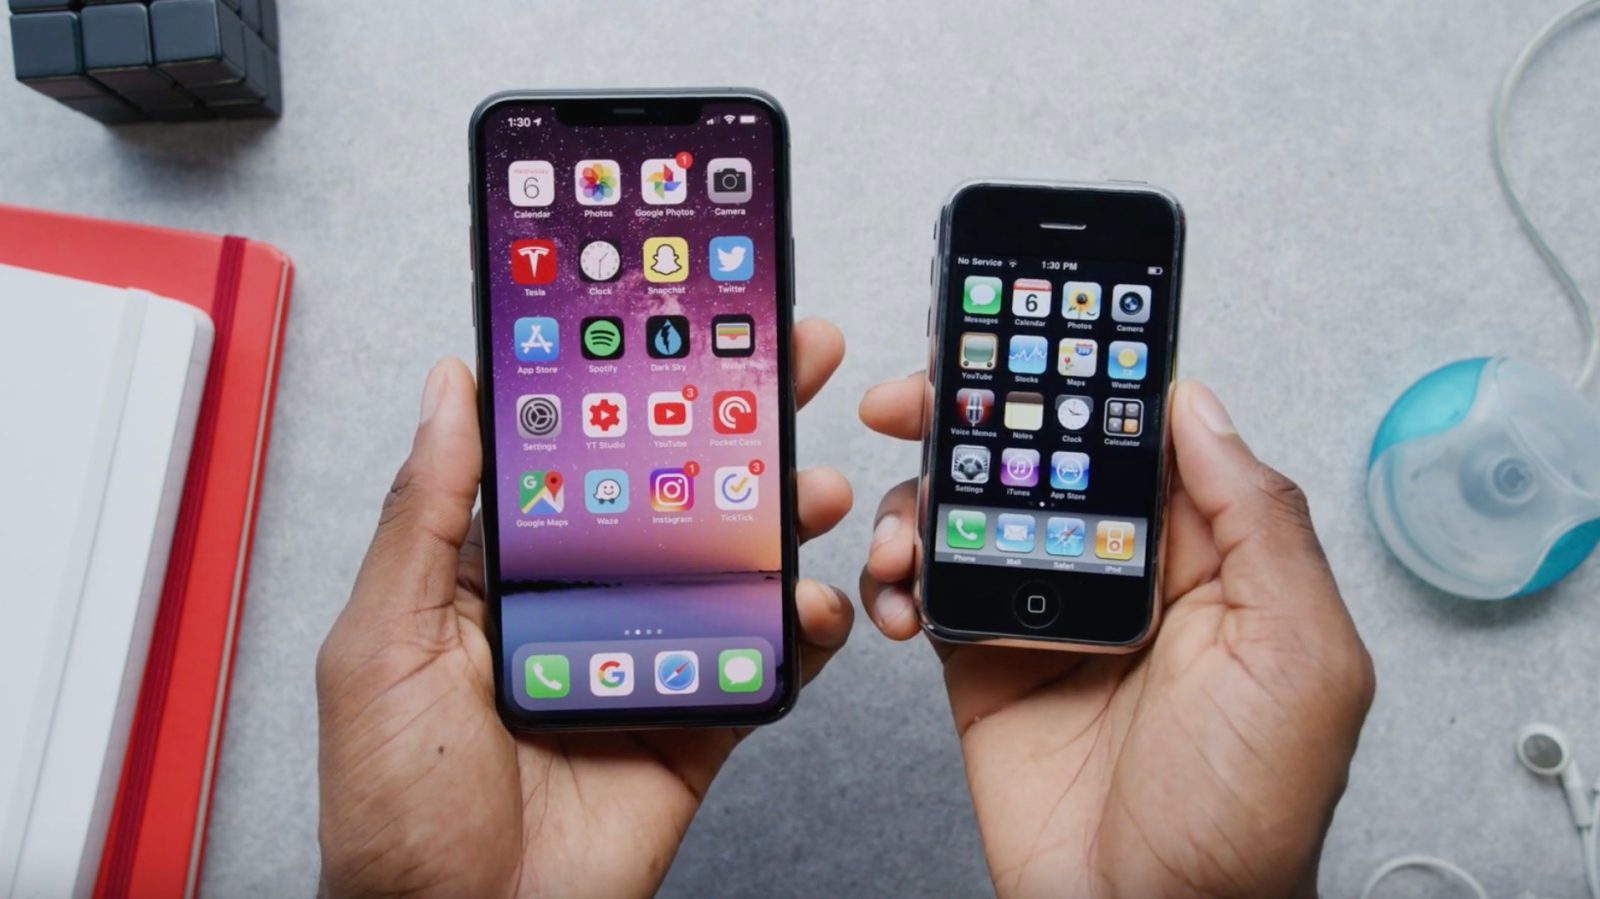 New video compares the original iPhone iPhone 11 Pro design, camera, and more - 9to5Mac